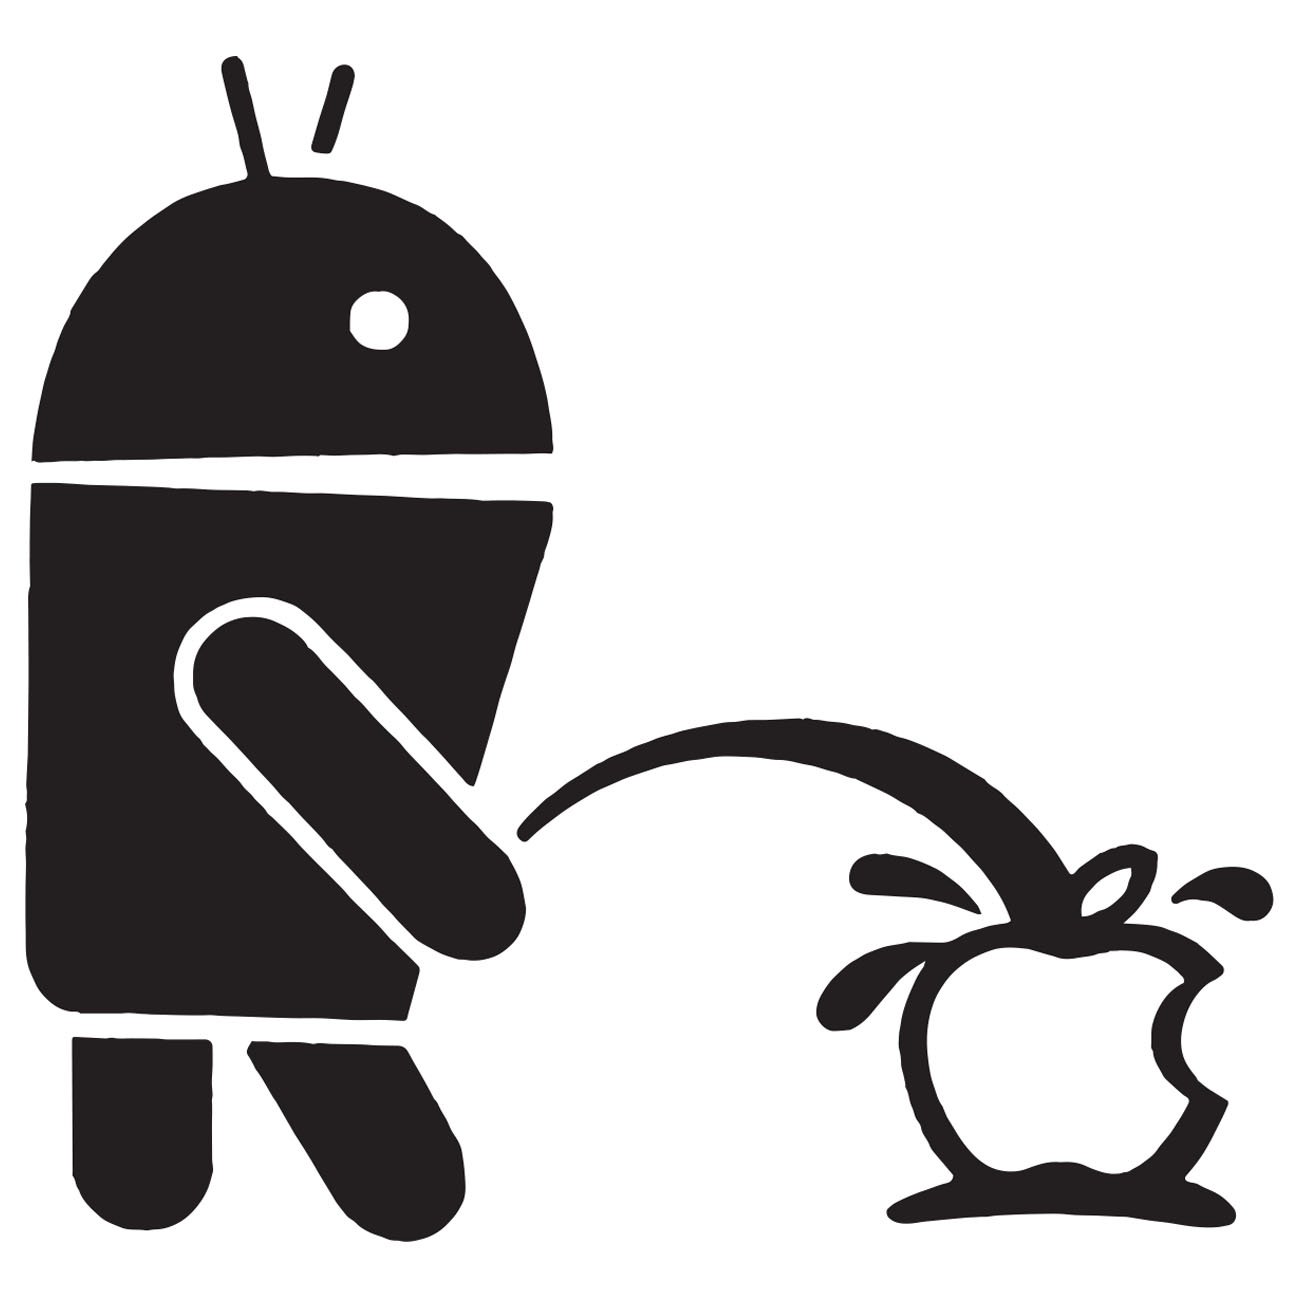 Android pisses on apple